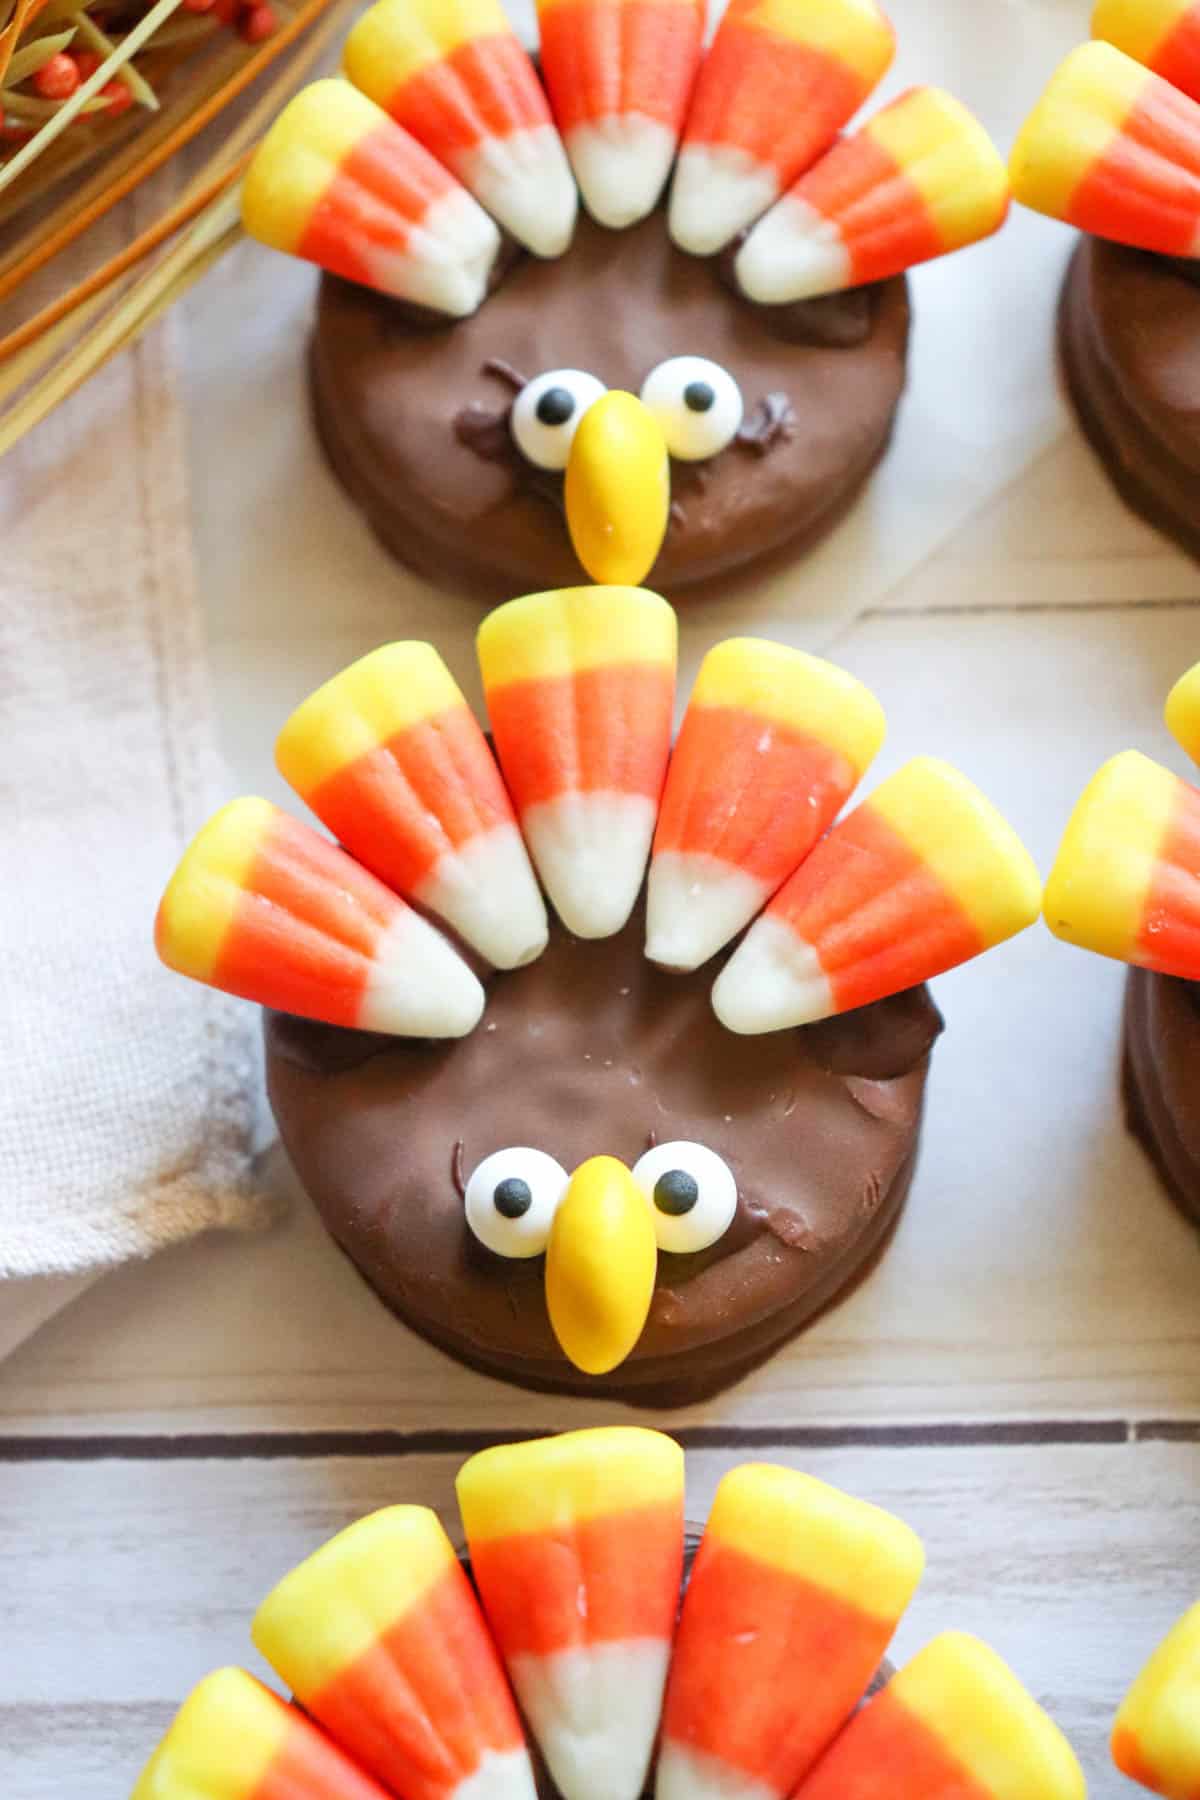 Up close look at a turkey cookie showing the details of the added candies.